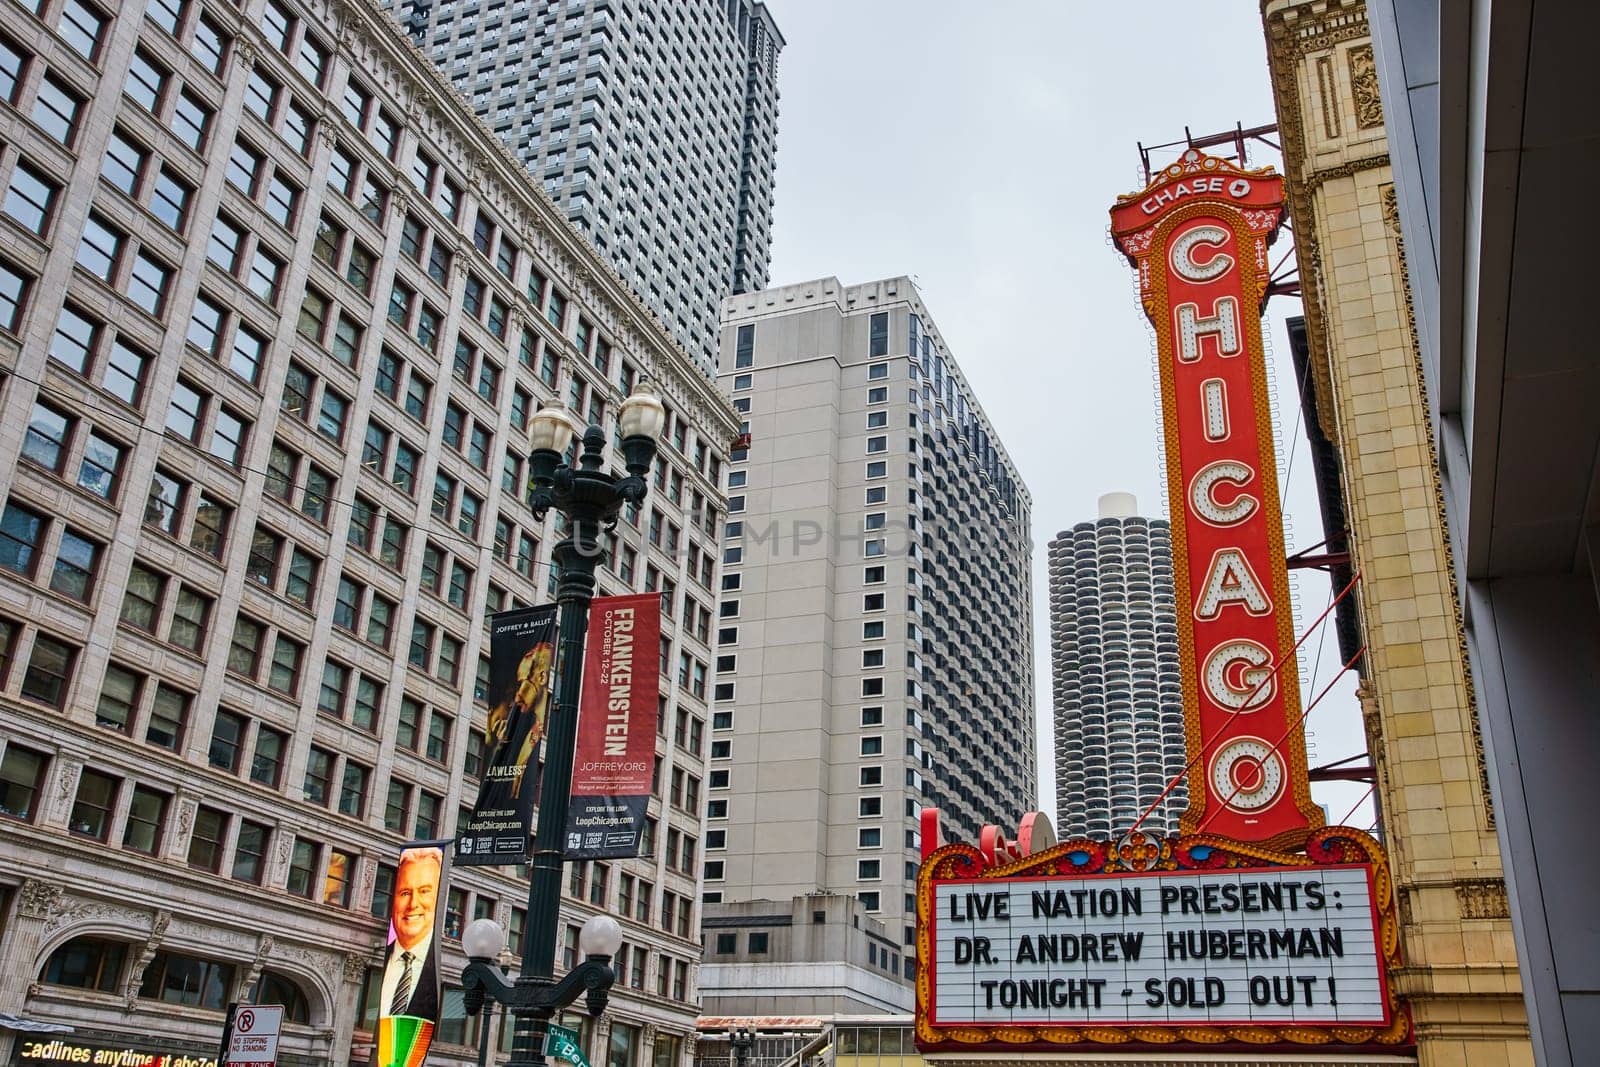 Image of Large orange sign with Chicago in white lettering above a theatre sign in city with skyscrapers